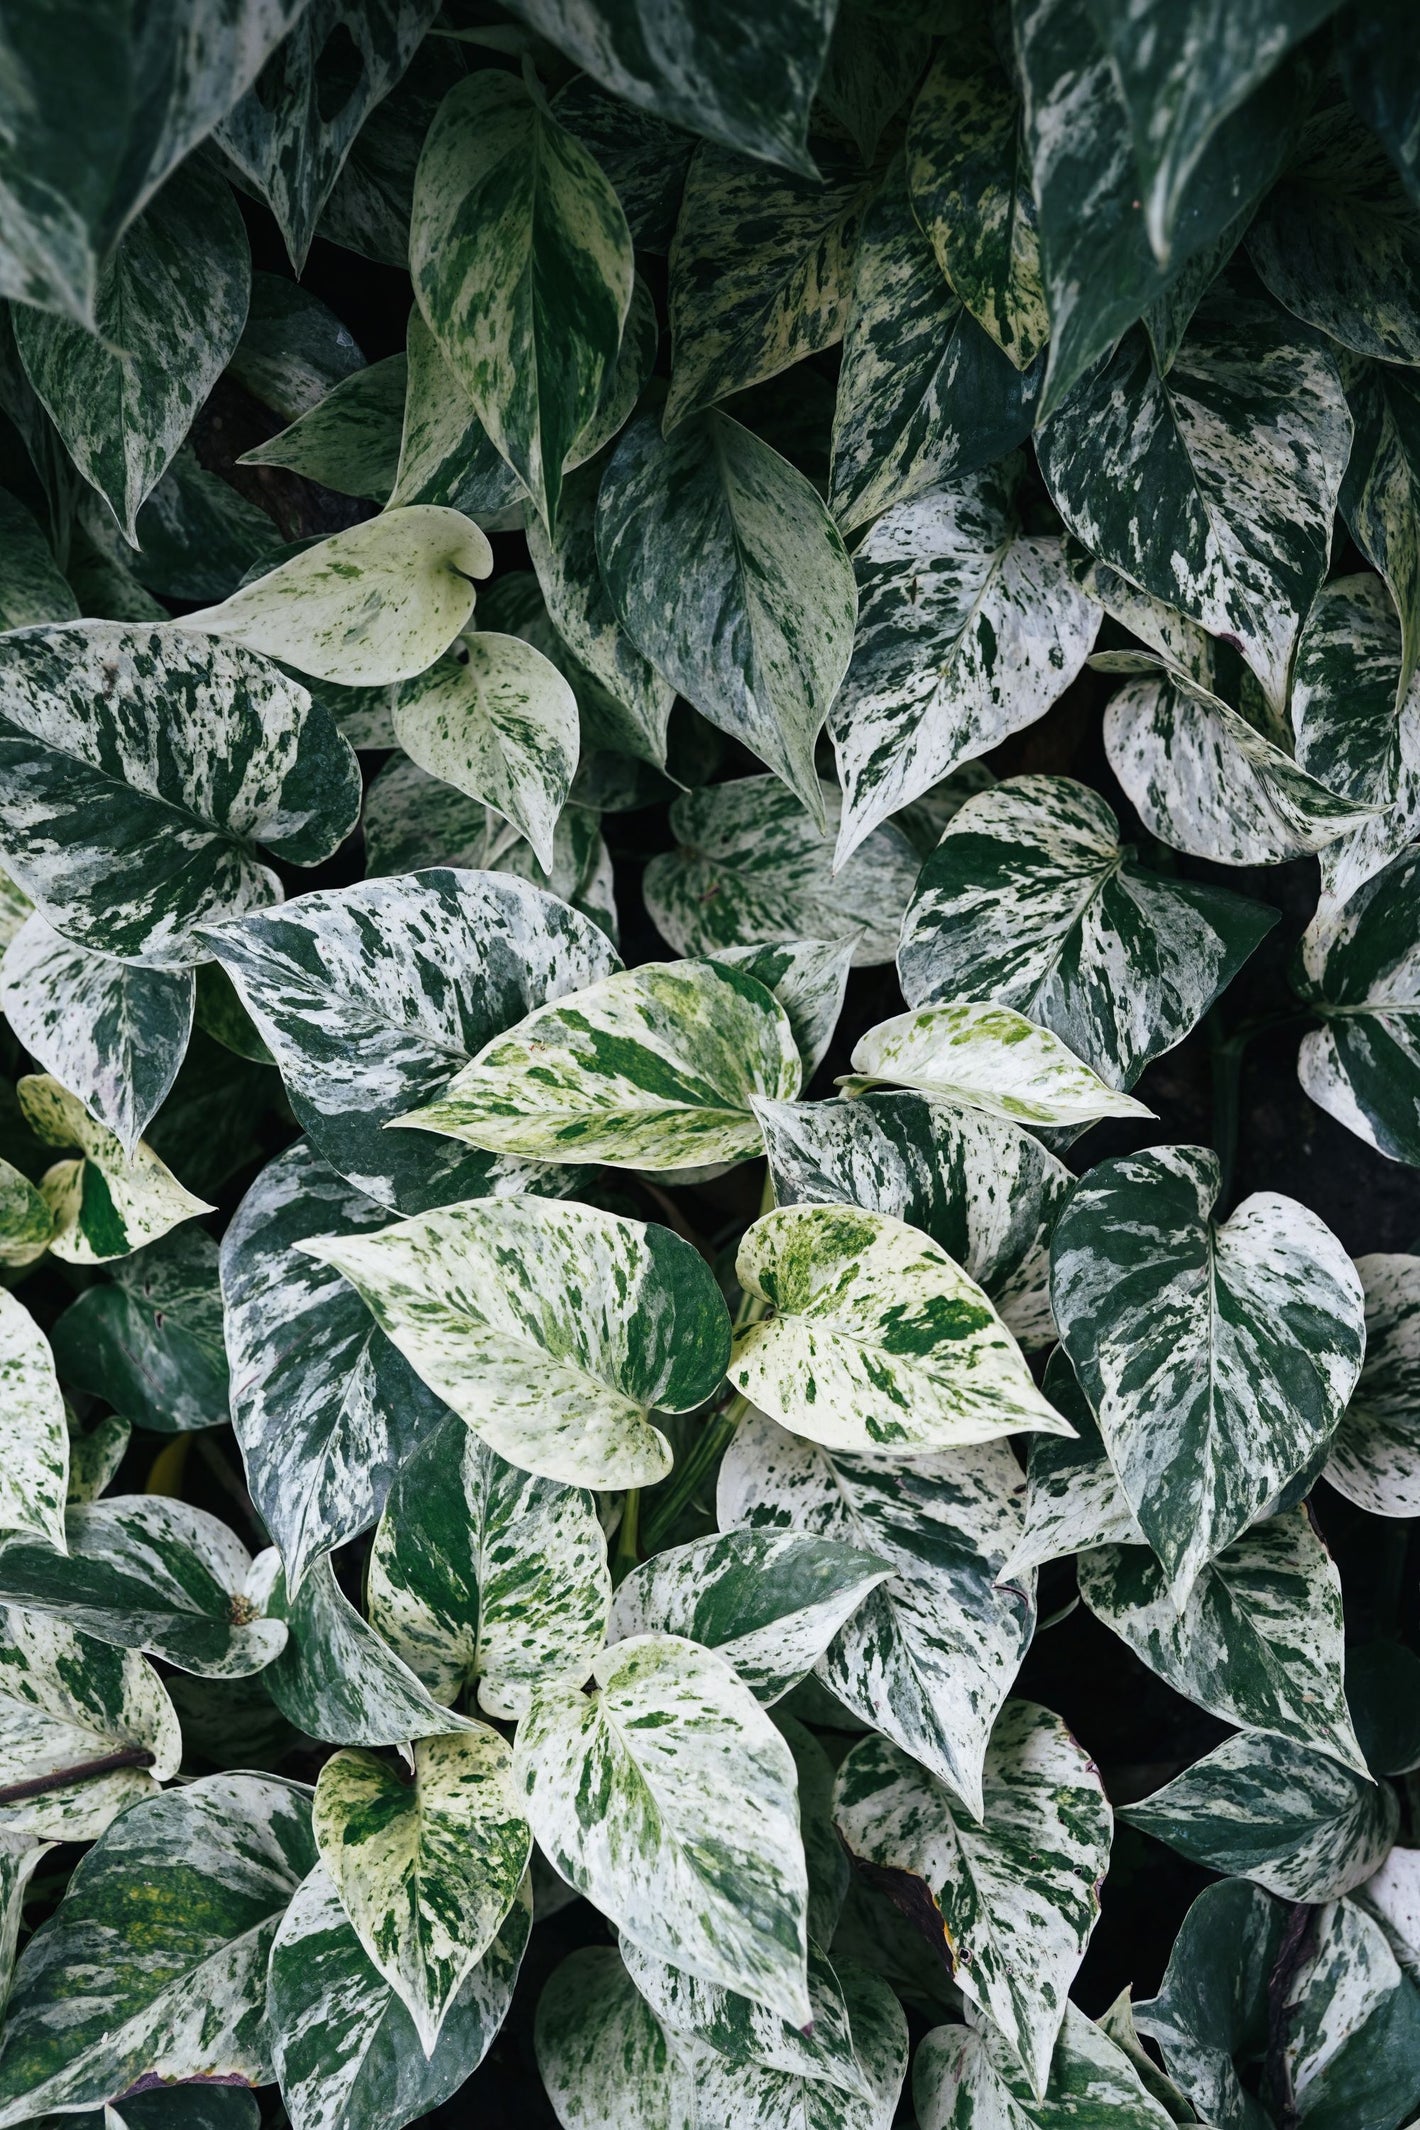 Groundcover of heavily white variegated pothos leaves with speckles of green, creating contrast against the white leaves. The leaves appear lush and healthy, and the gentle sunlight illuminates them, highlighting their unique pattern. The darkness between the leaves adds depth and visual interest to the composition.